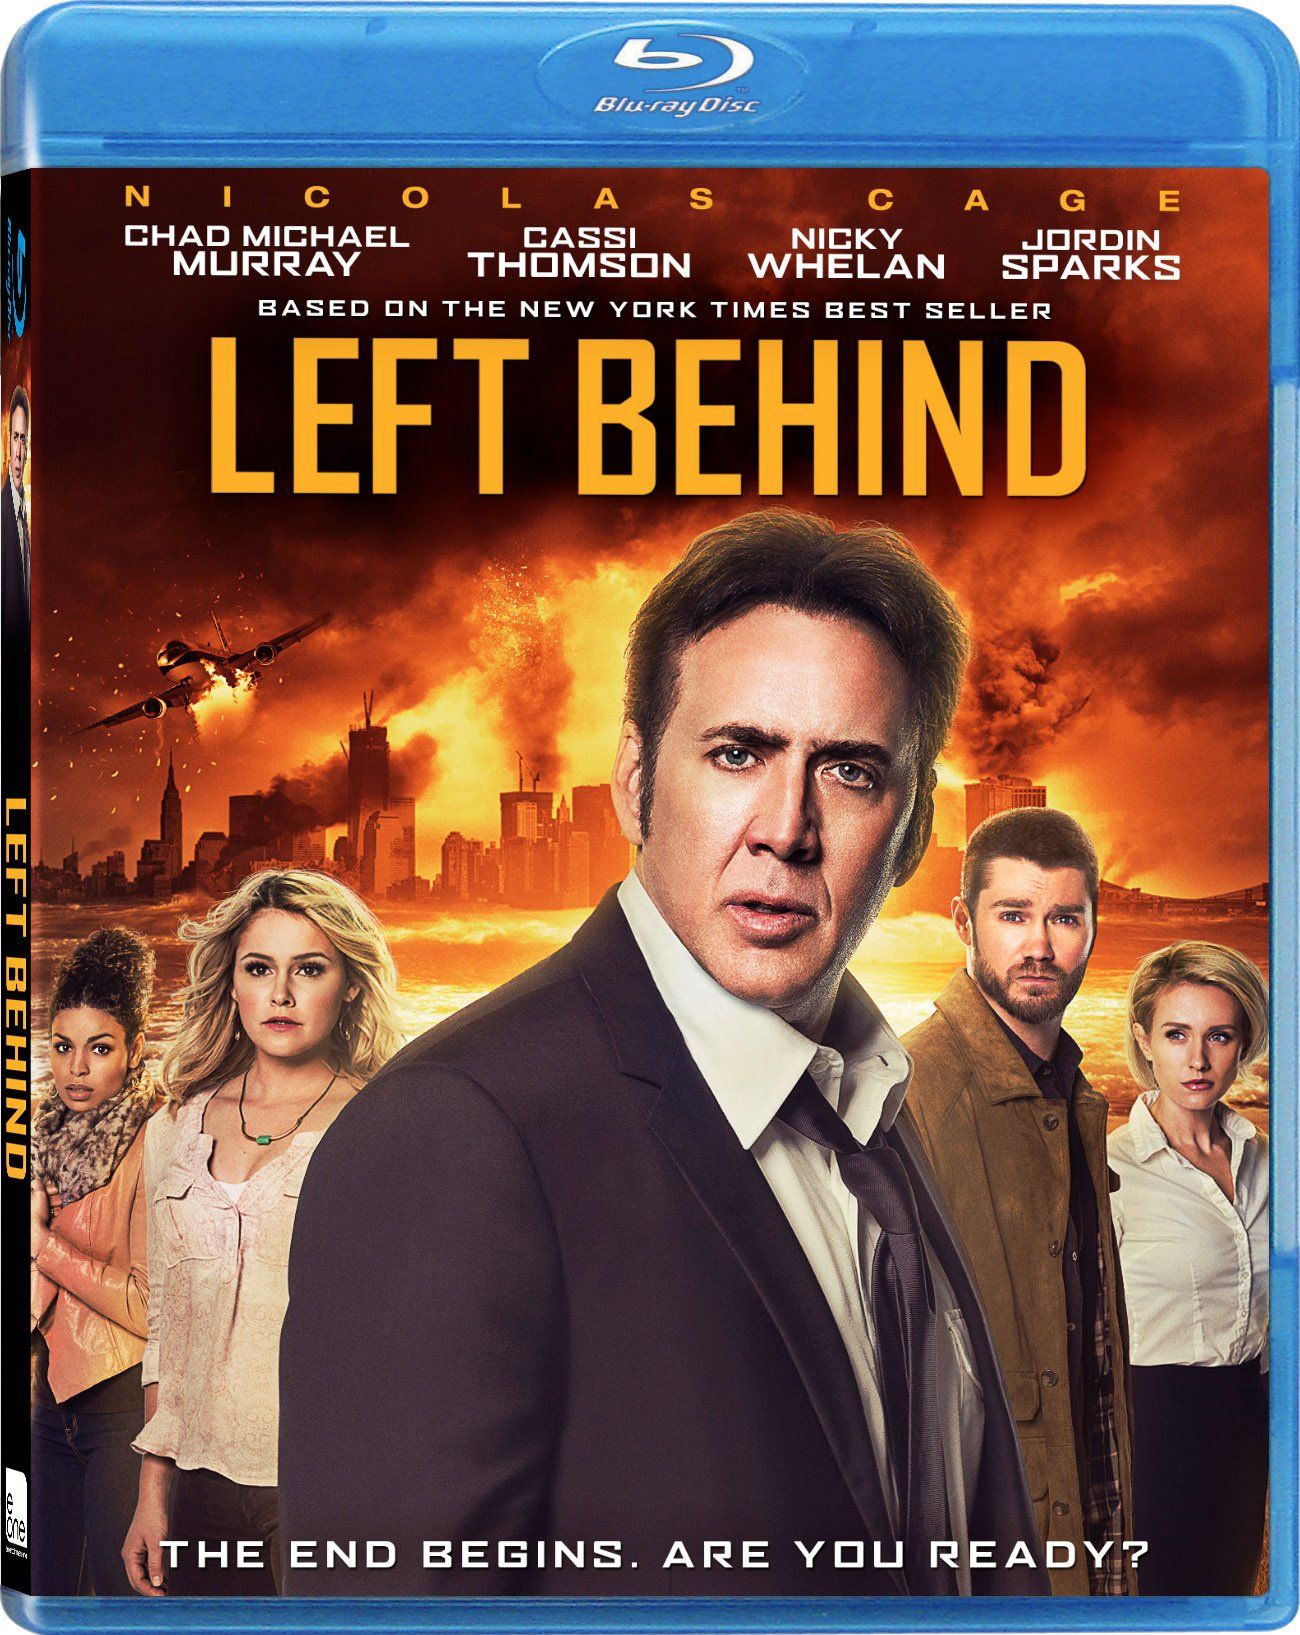 Left Behind DVD Release Date January 6, 2015